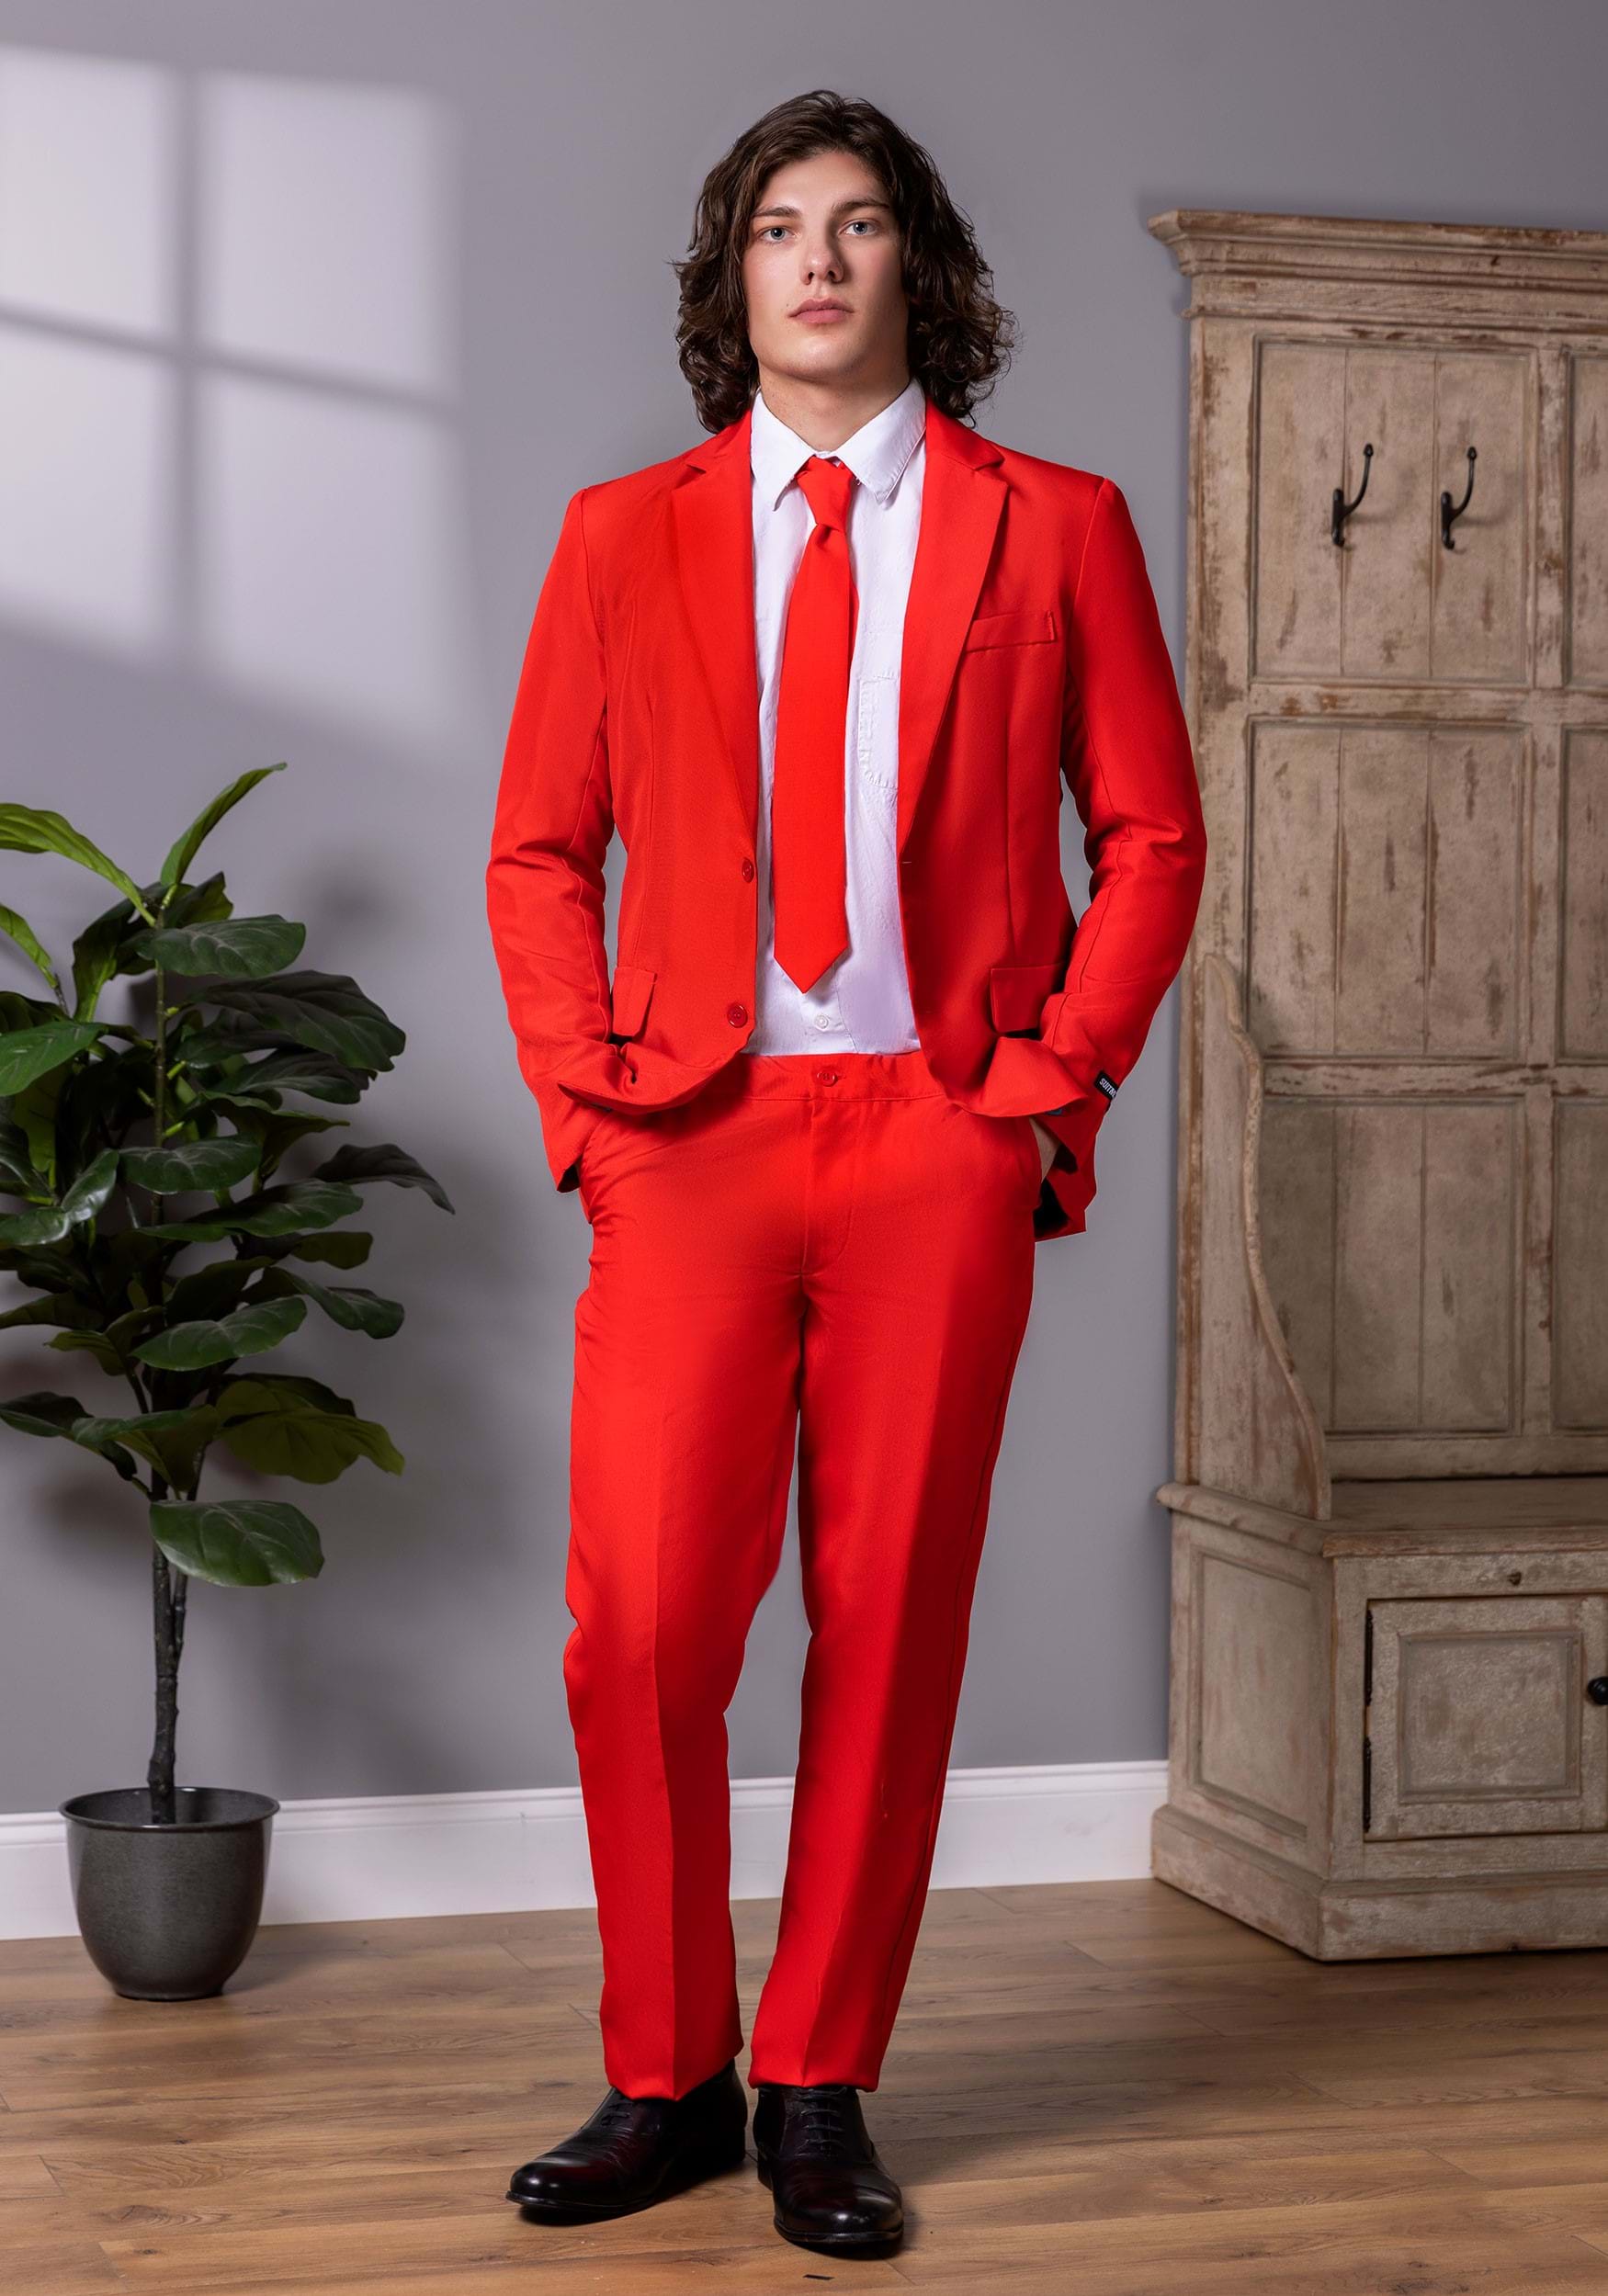 https://images.halloweencostumes.ca/products/74081/2-1-276015/suitmeister-solid-red-alt-1.jpg